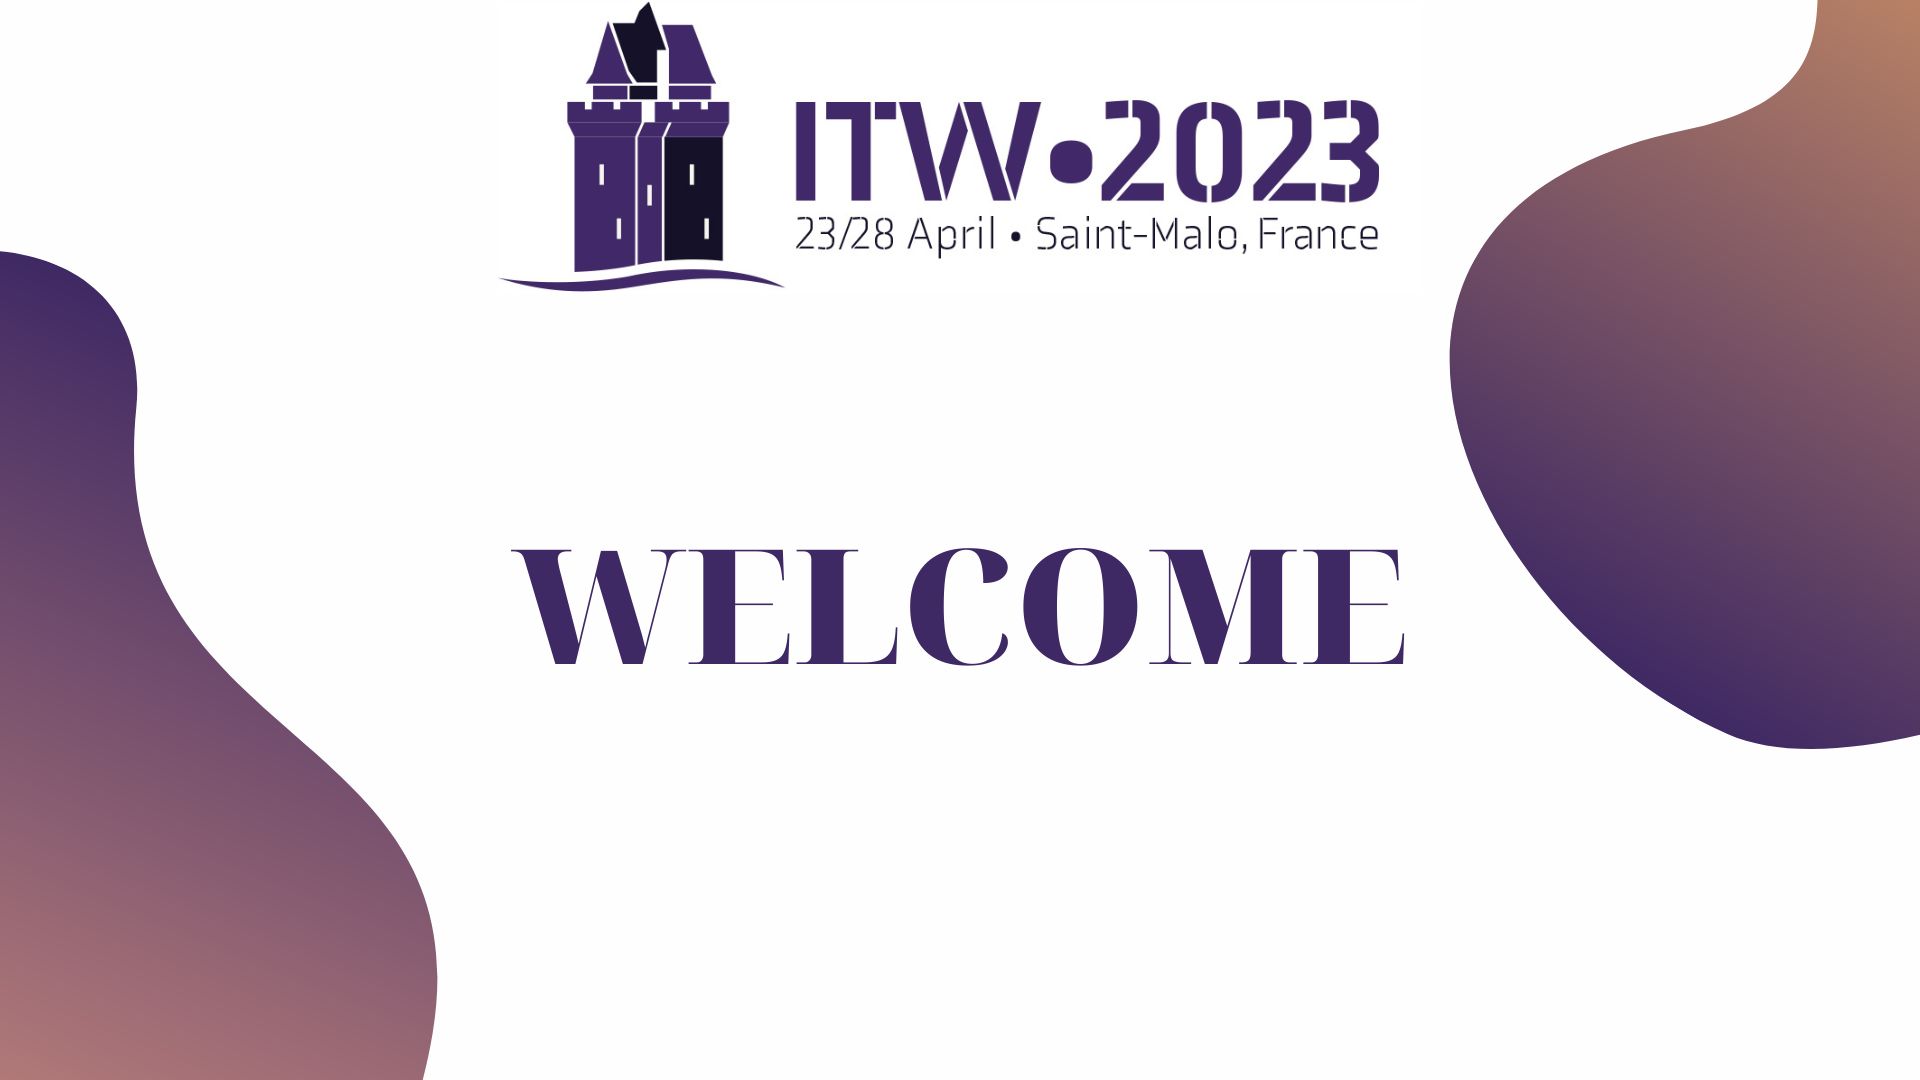 ITW 2023 - IEEE INTERNATIONAL CONFERENCE - April 23-28, 2023.